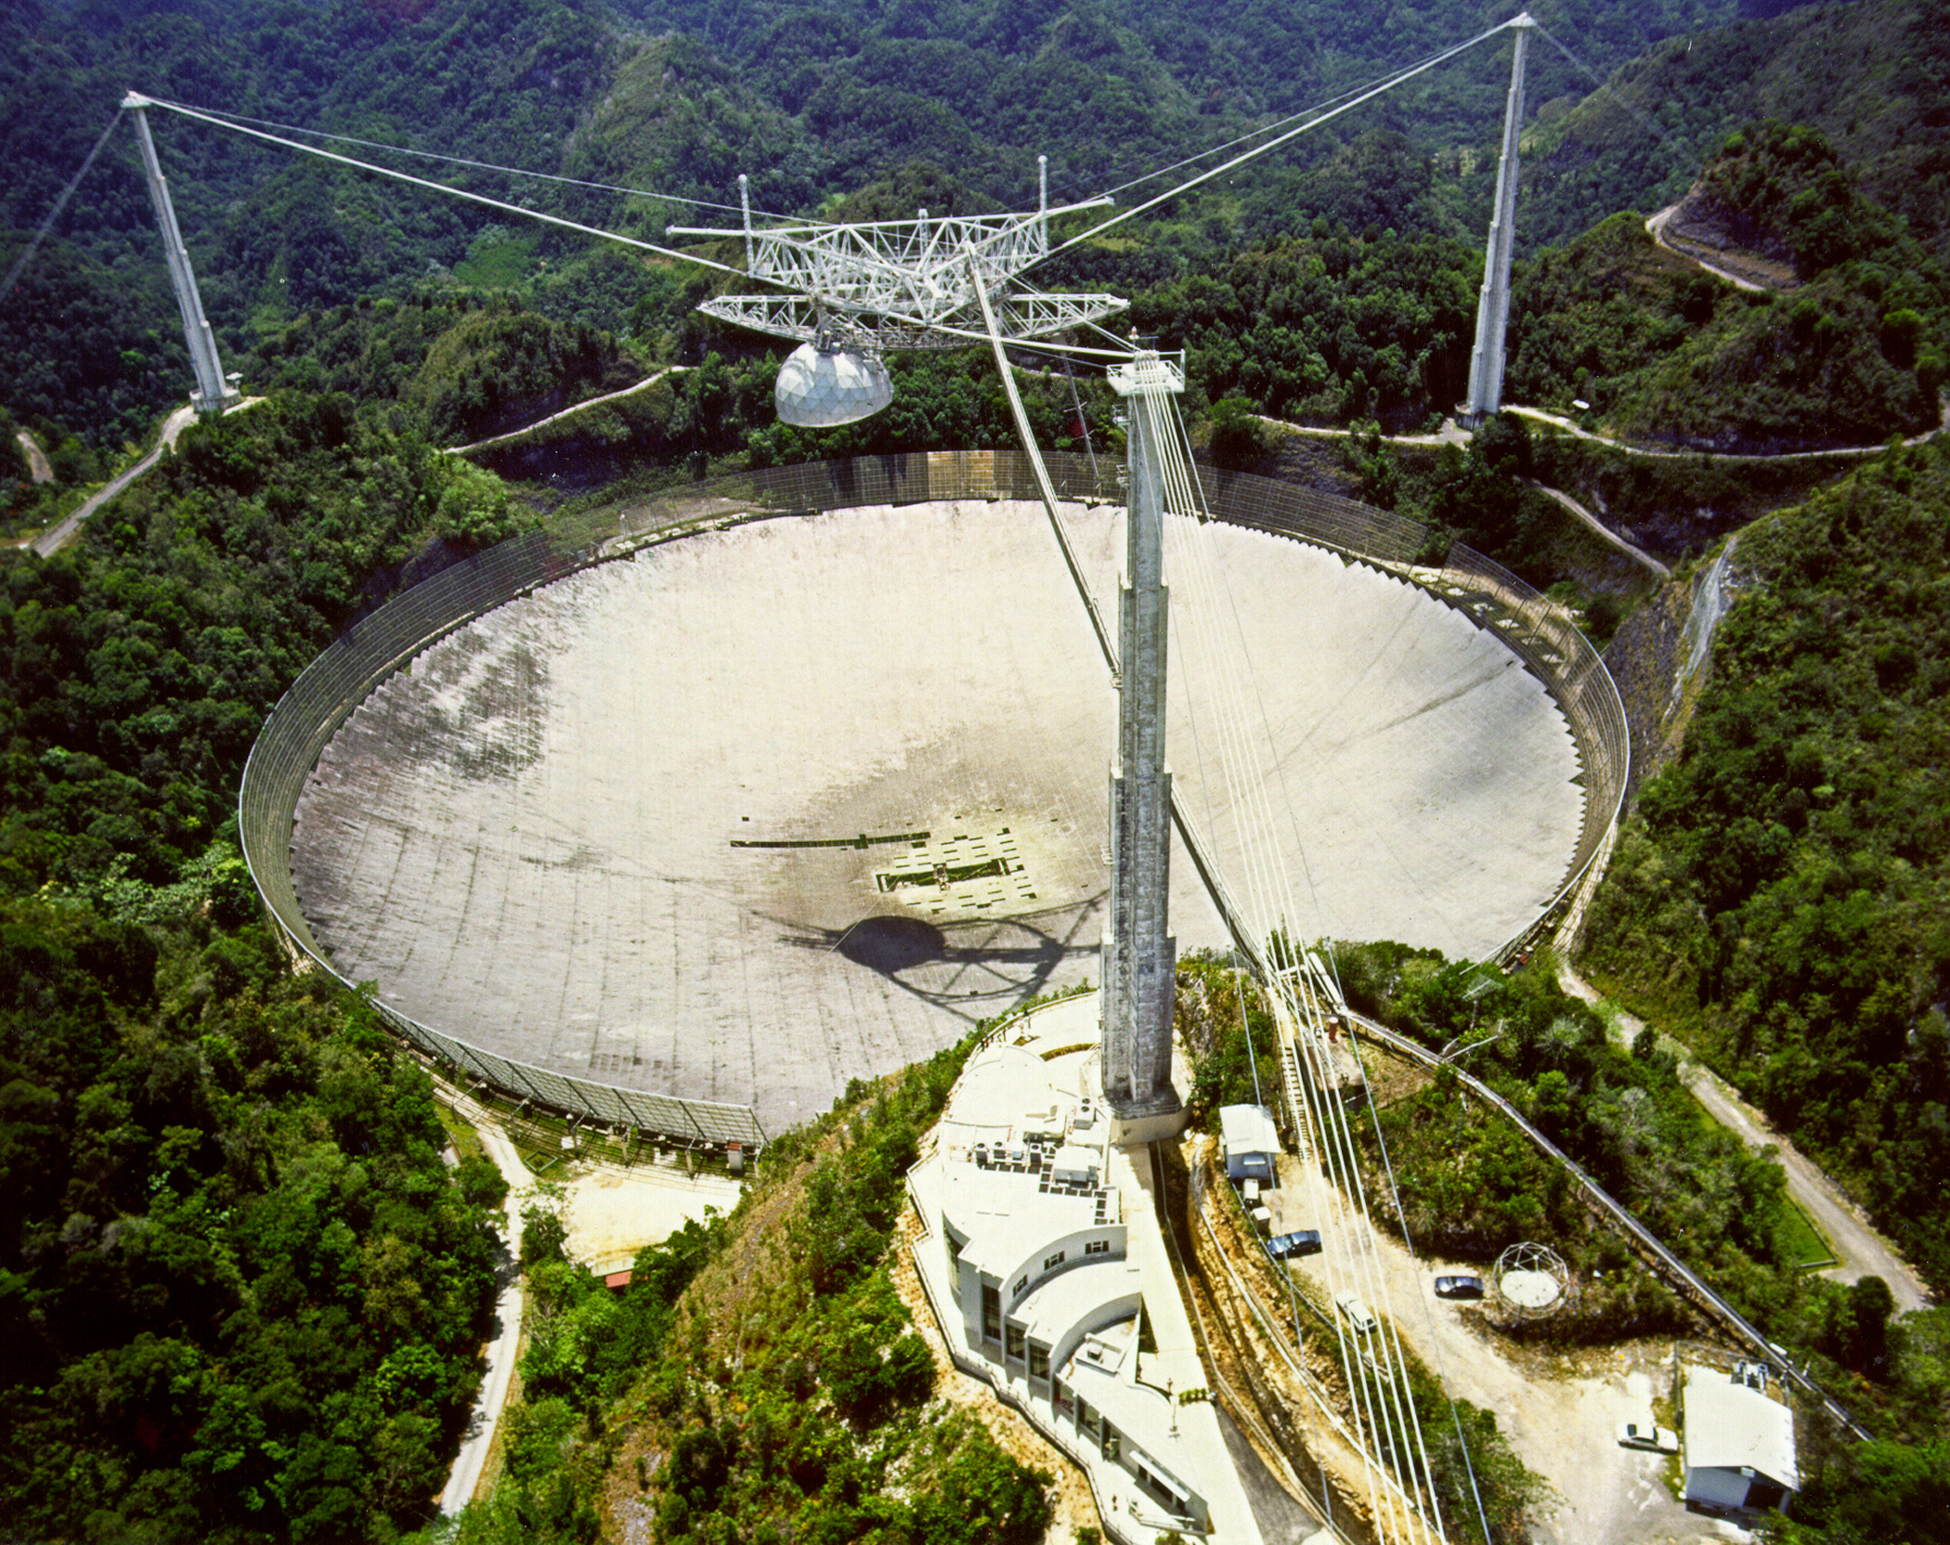 The Arecibo Observatory, located in Puerto Rico. Credit: NAIC - Arecibo Observatory, a facility of the NSF